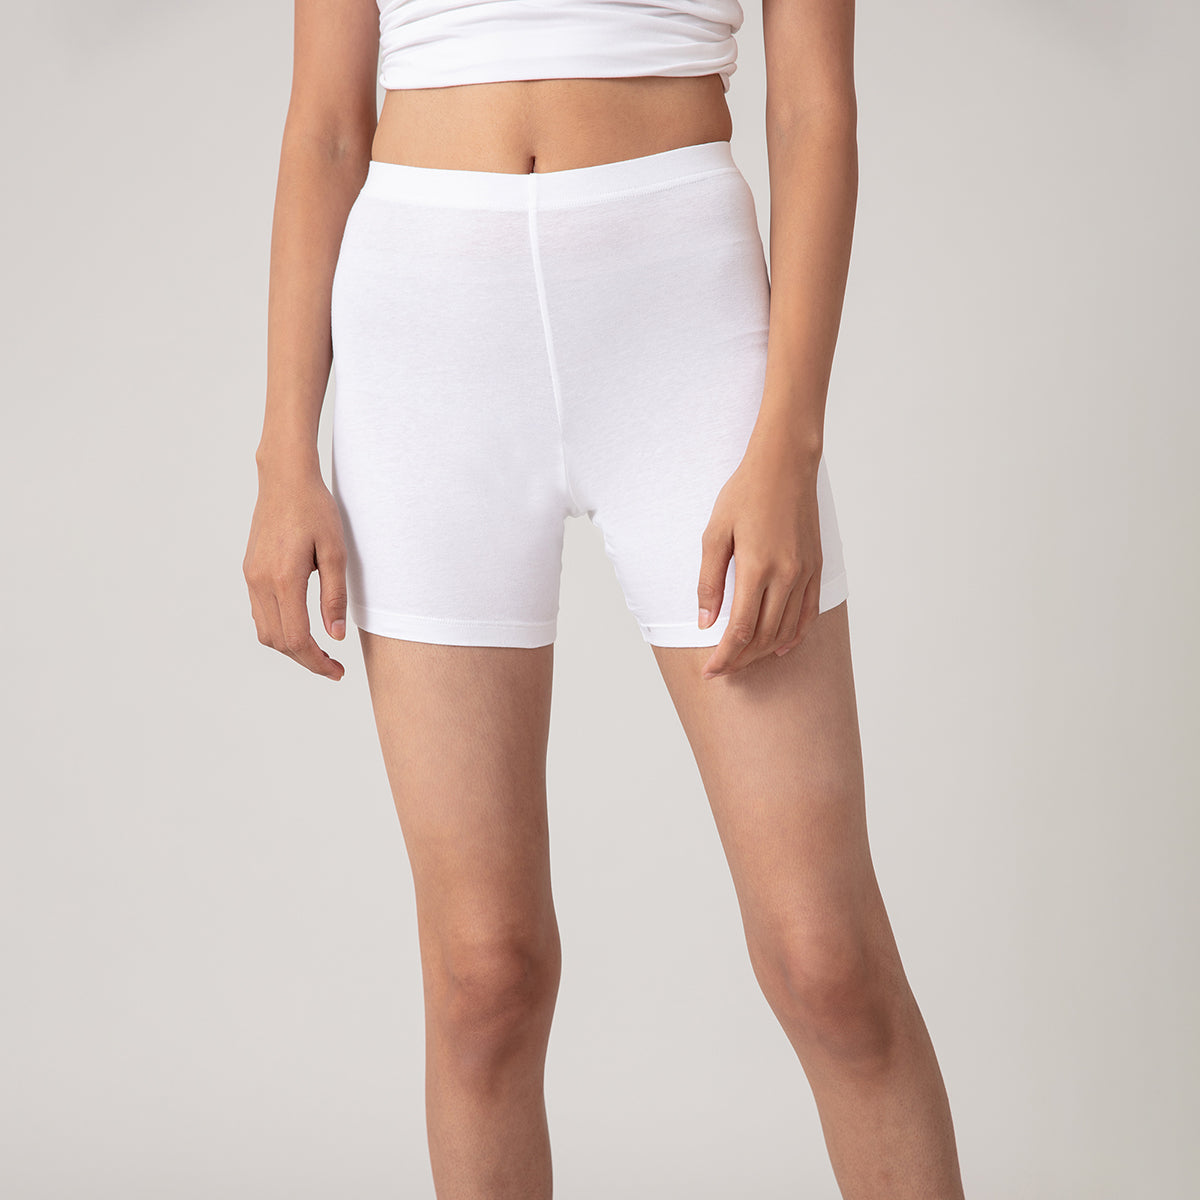 Nykd by Nykaa Pack of 2 Stretch Cotton Cycling Shorts-NYP083 Peacot & White